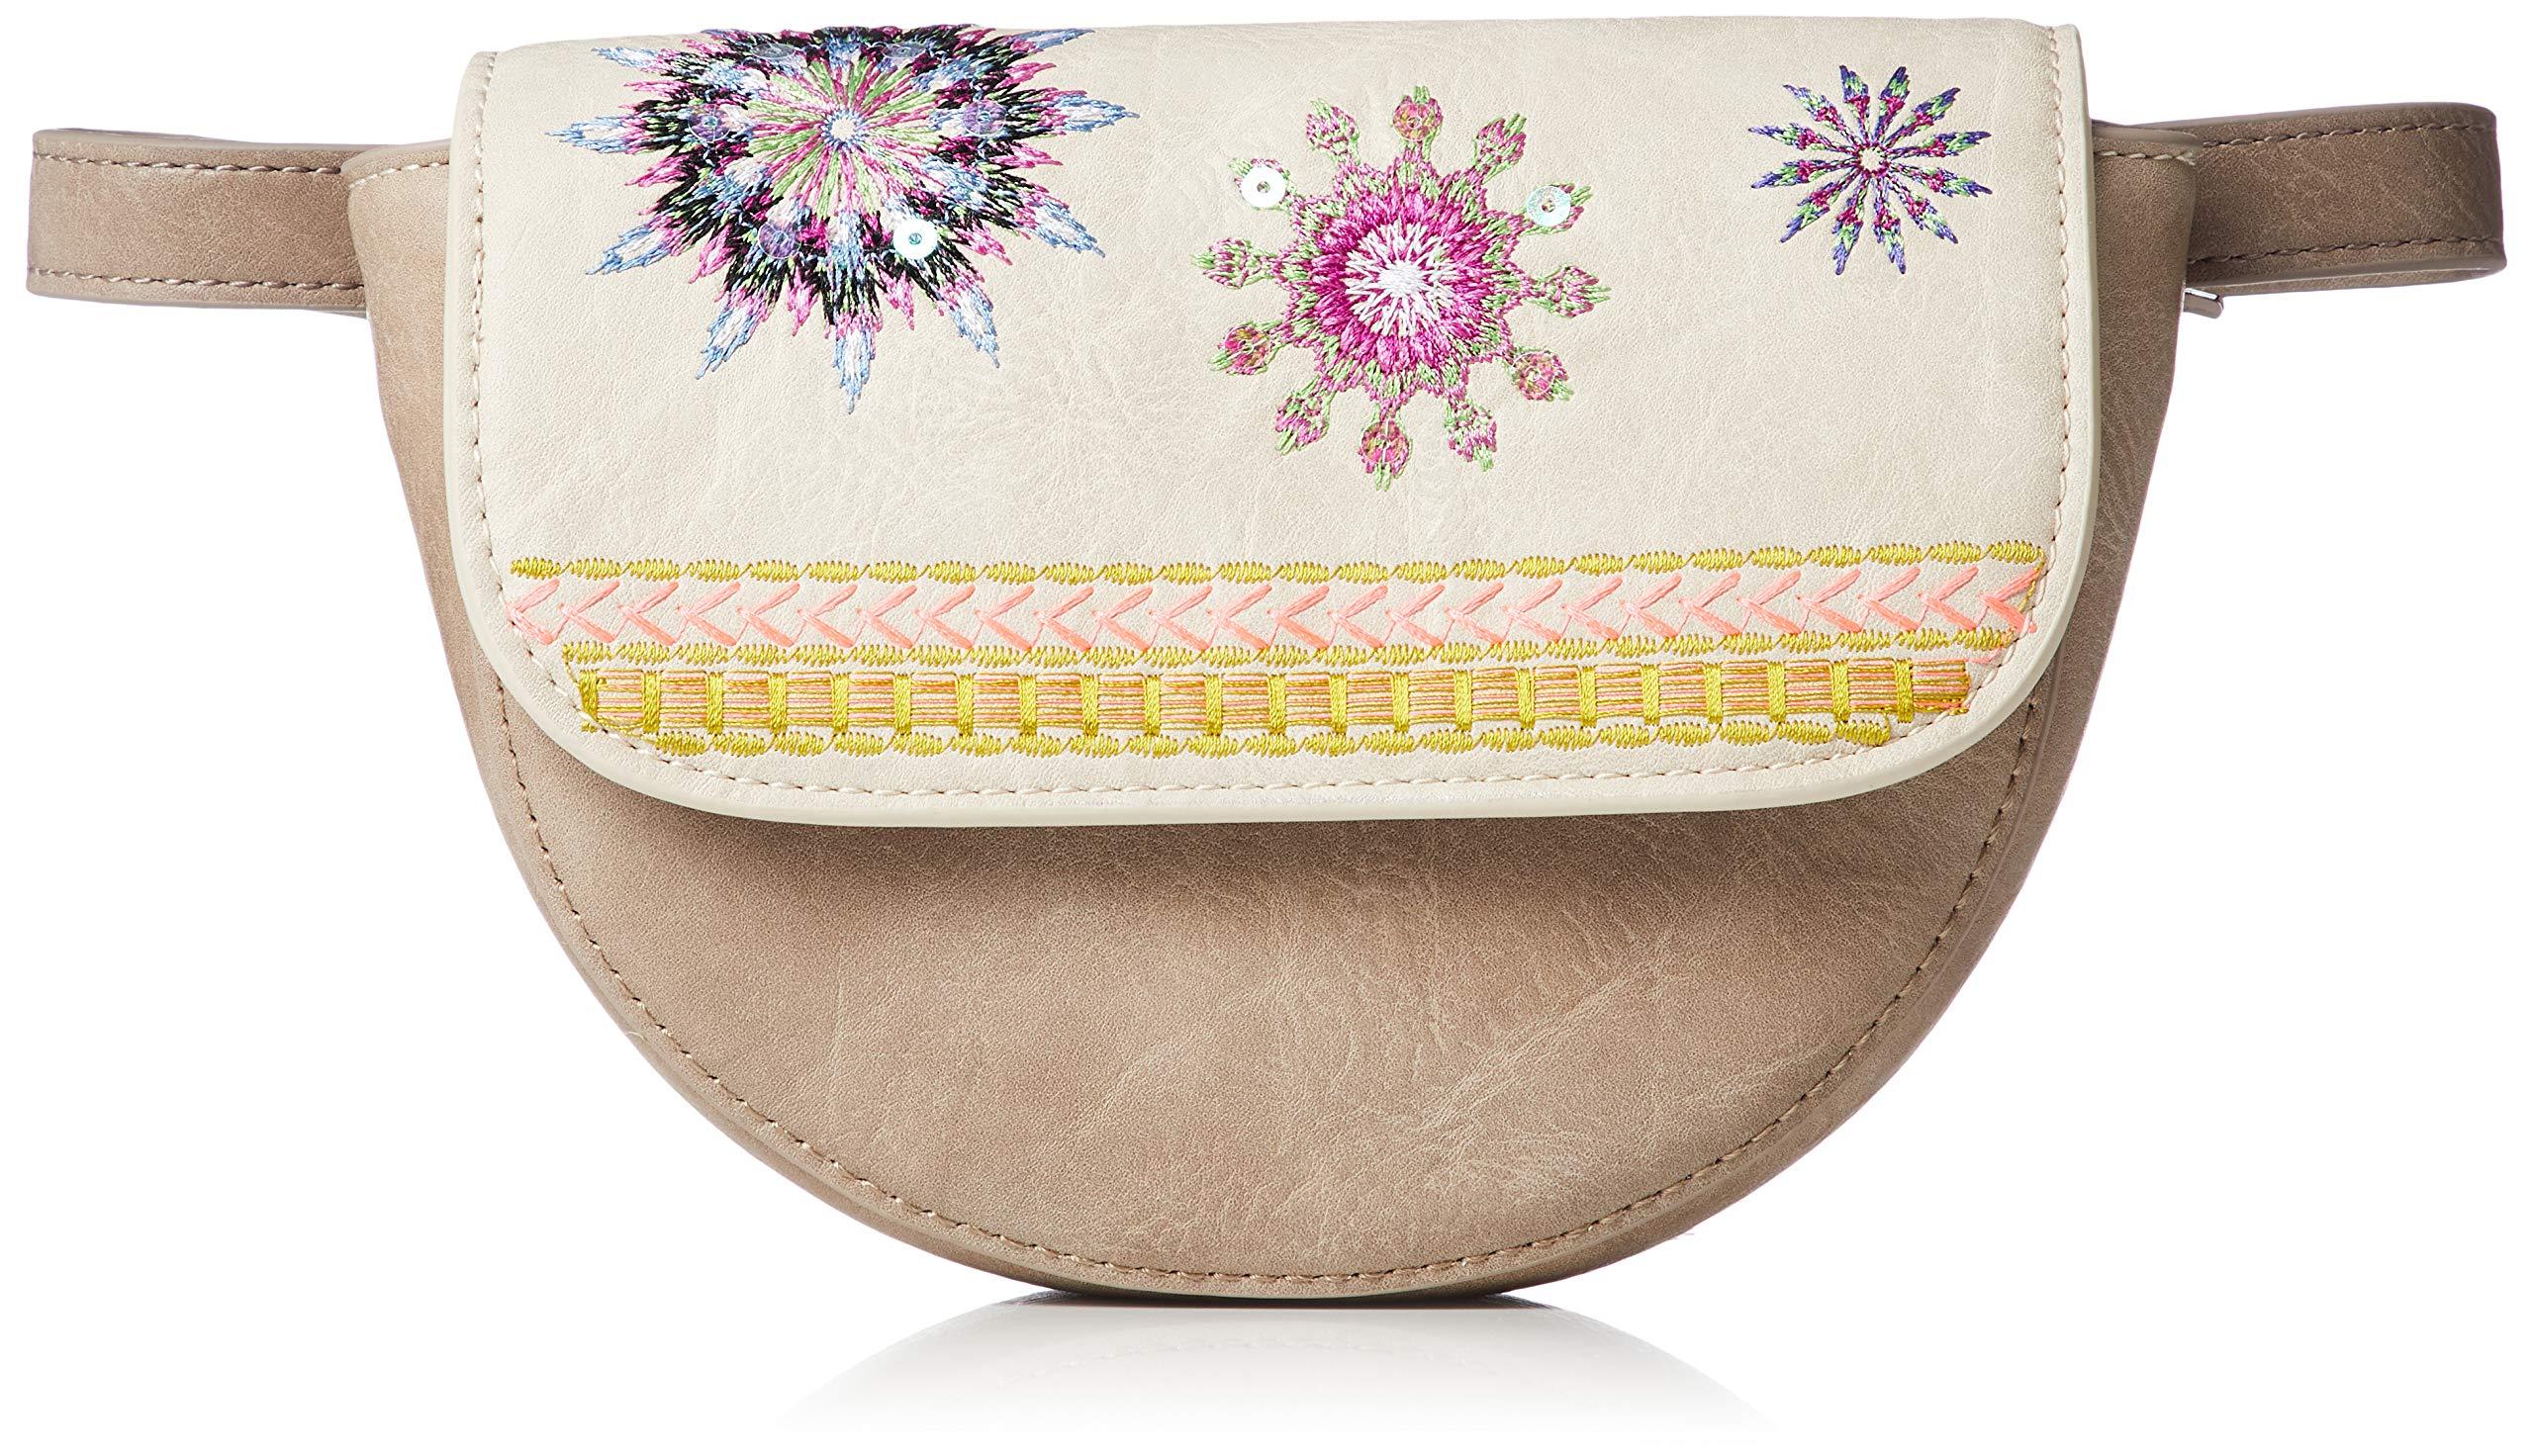 Desigual Beige Rino Ada Nyon Dala Design Bum Bag With Chain Strap For  Shoulder in Natural - Lyst